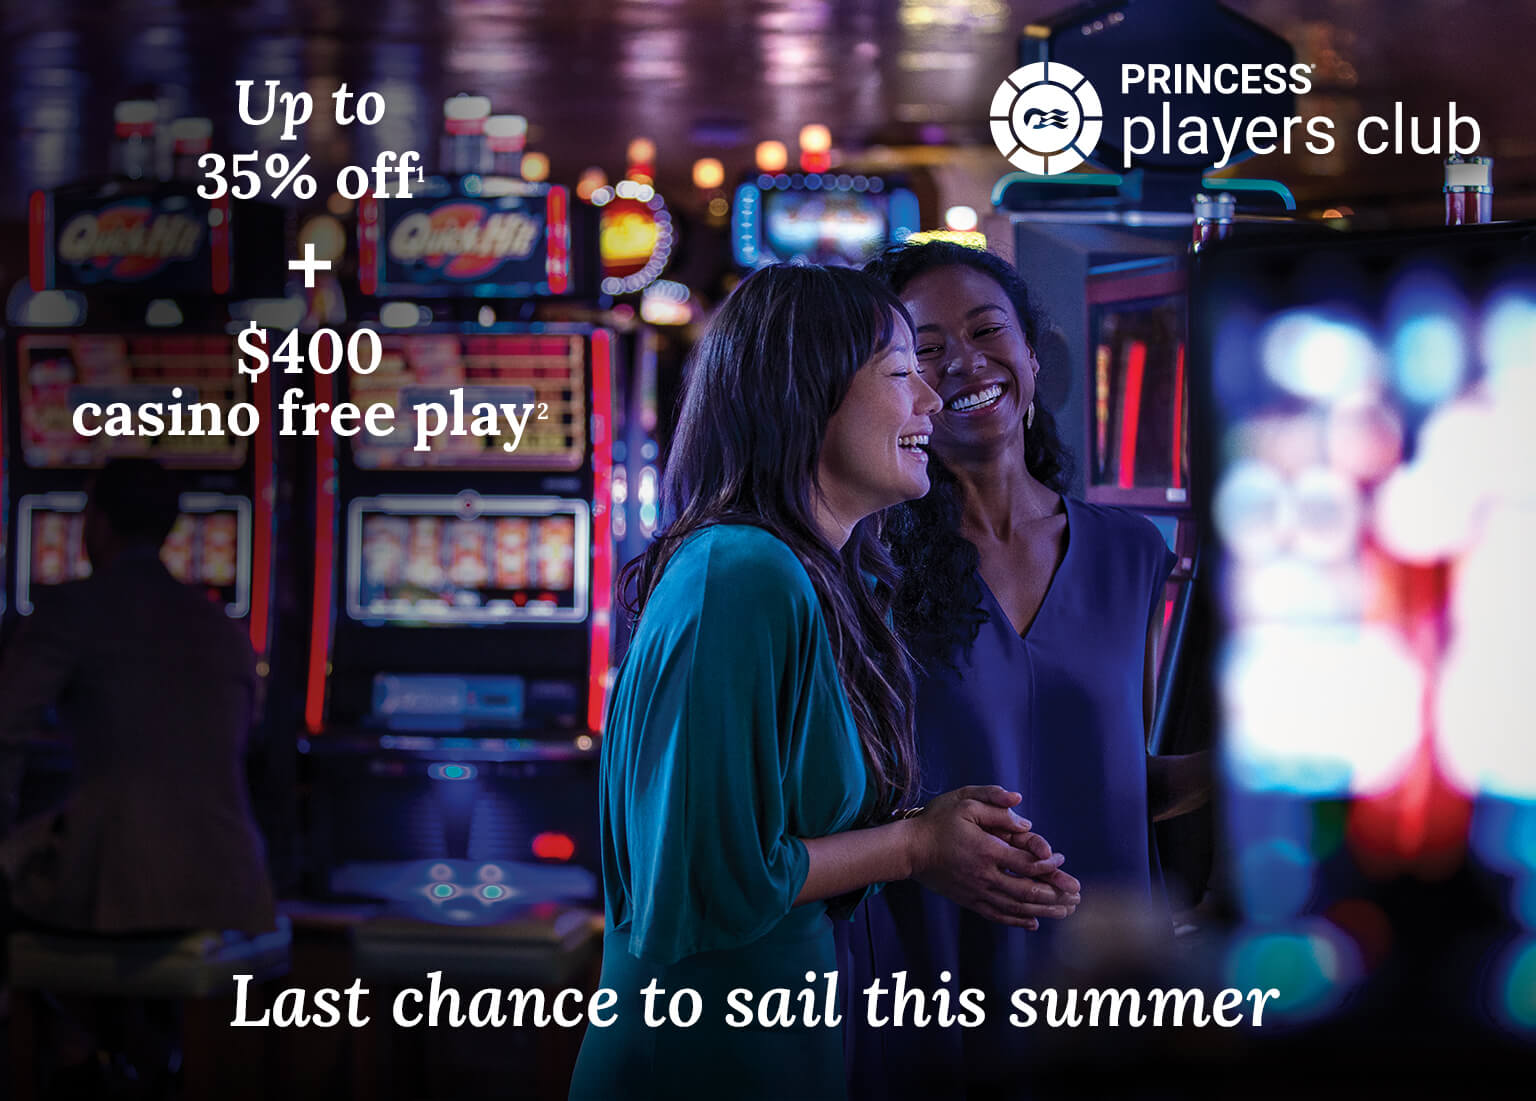 Up to 35% off + $400 casino free play. Click here to book.